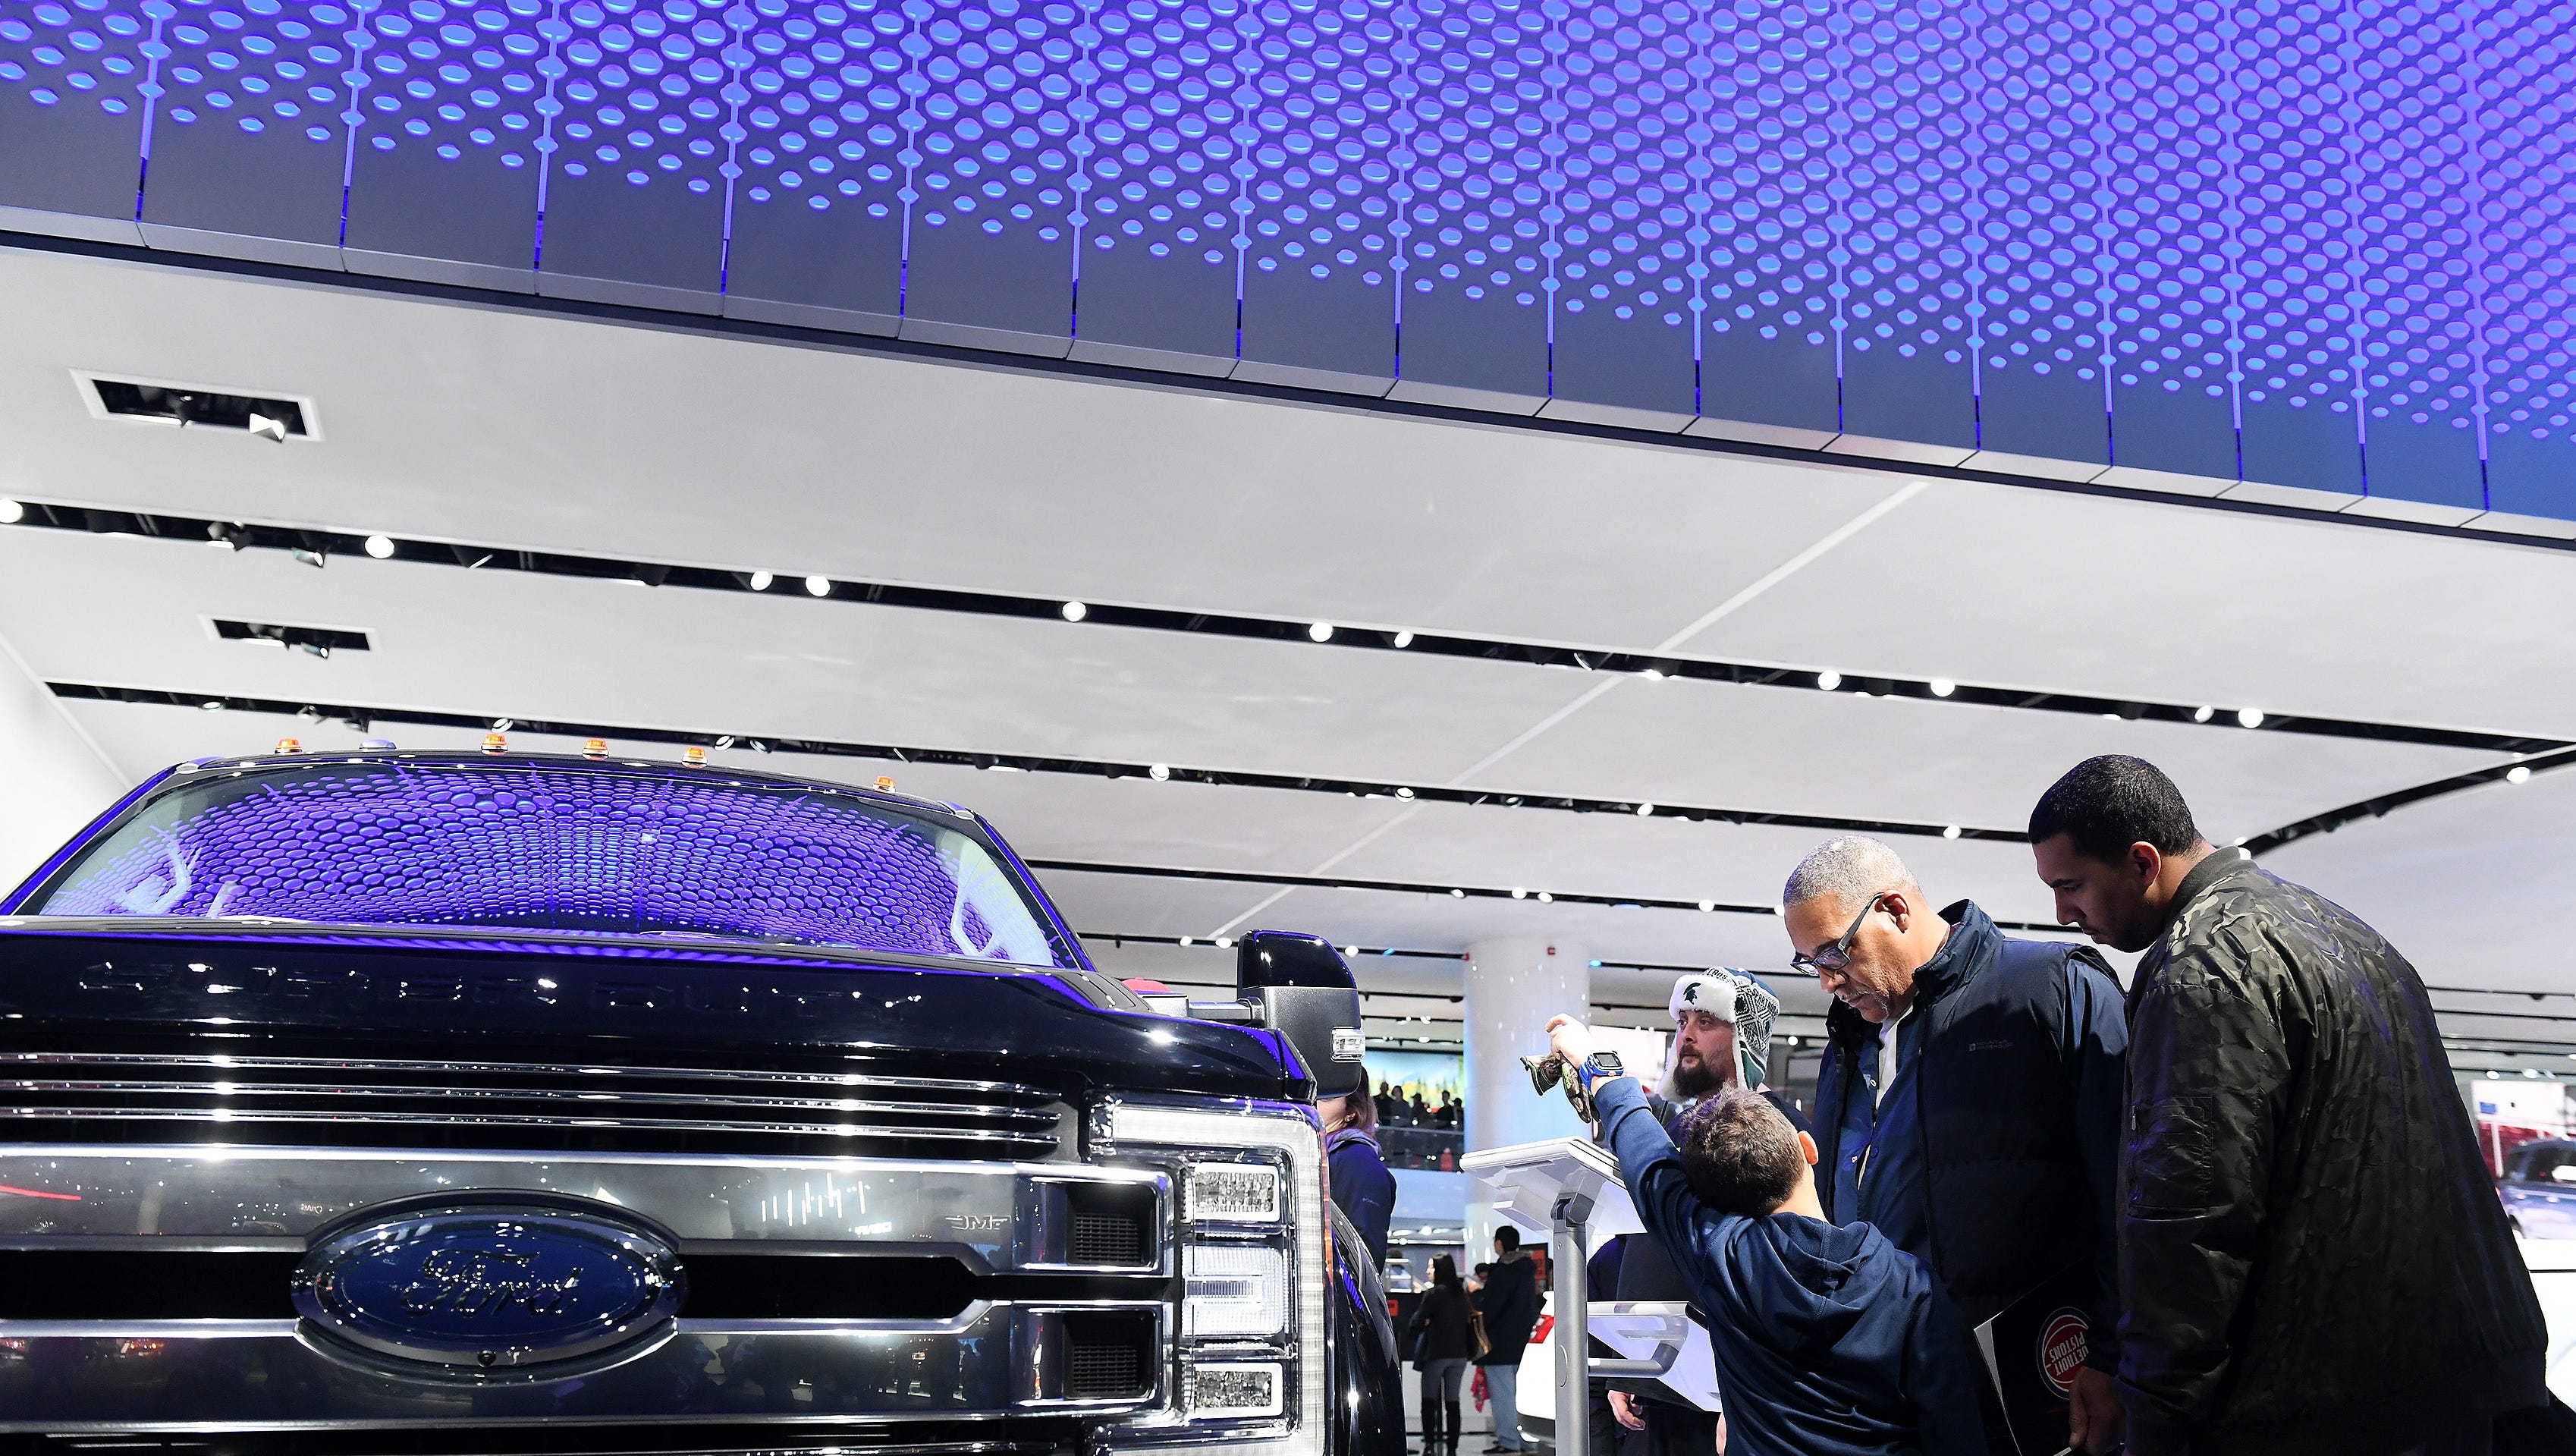 Keith Merrit of Canton, center, checks out the info on the Ford F-450 superduty truck with his sons, Travis Merritt, 8, and Kyle Merritt, 27, right, home of leave from the U.S. Air Force at the final day of the North American International Auto Show.